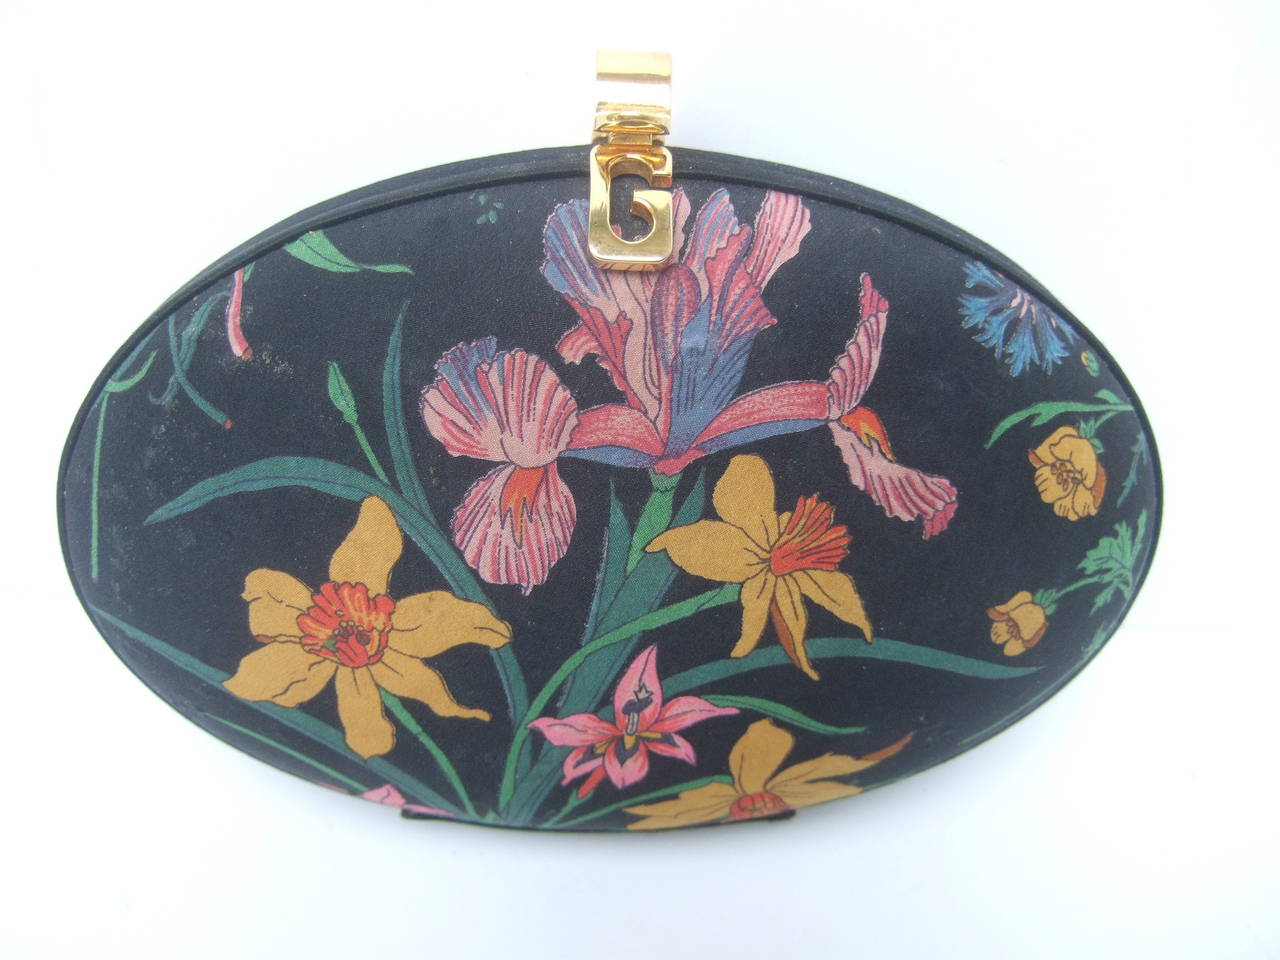 Gucci flower print egg shaped clutch bag c 1980s
The rare Gucci handbag is designed with a cloth floral print covering
Both exterior sides have a field of spring time flowers set against the
black cloth background. A black satin band circles the